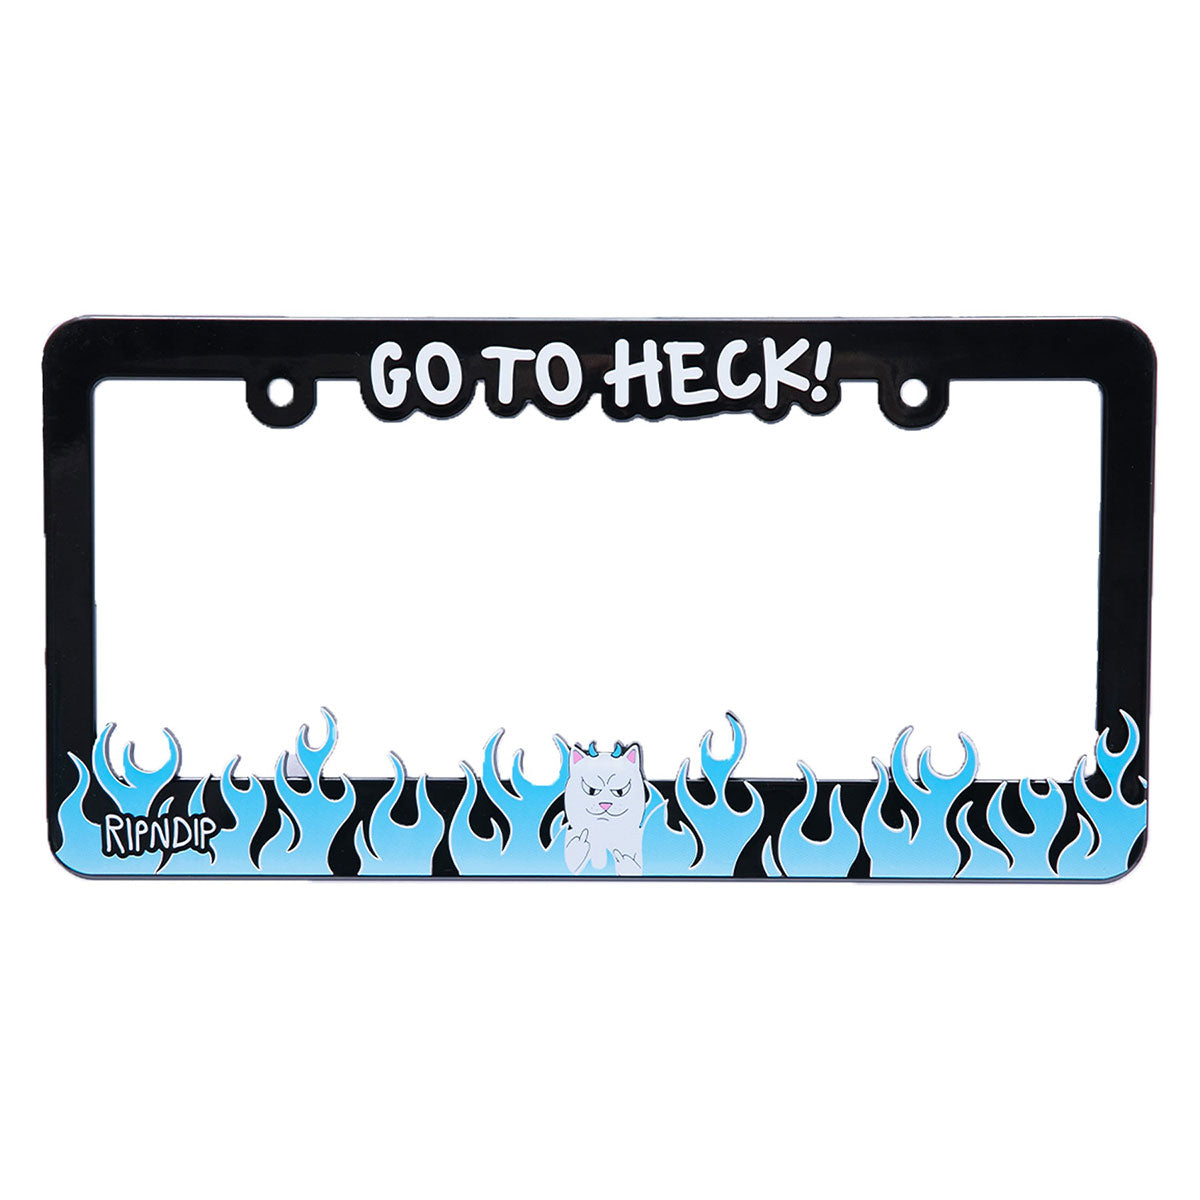 RIPNDIP Go To Heck License Plate Accessories - Black image 1